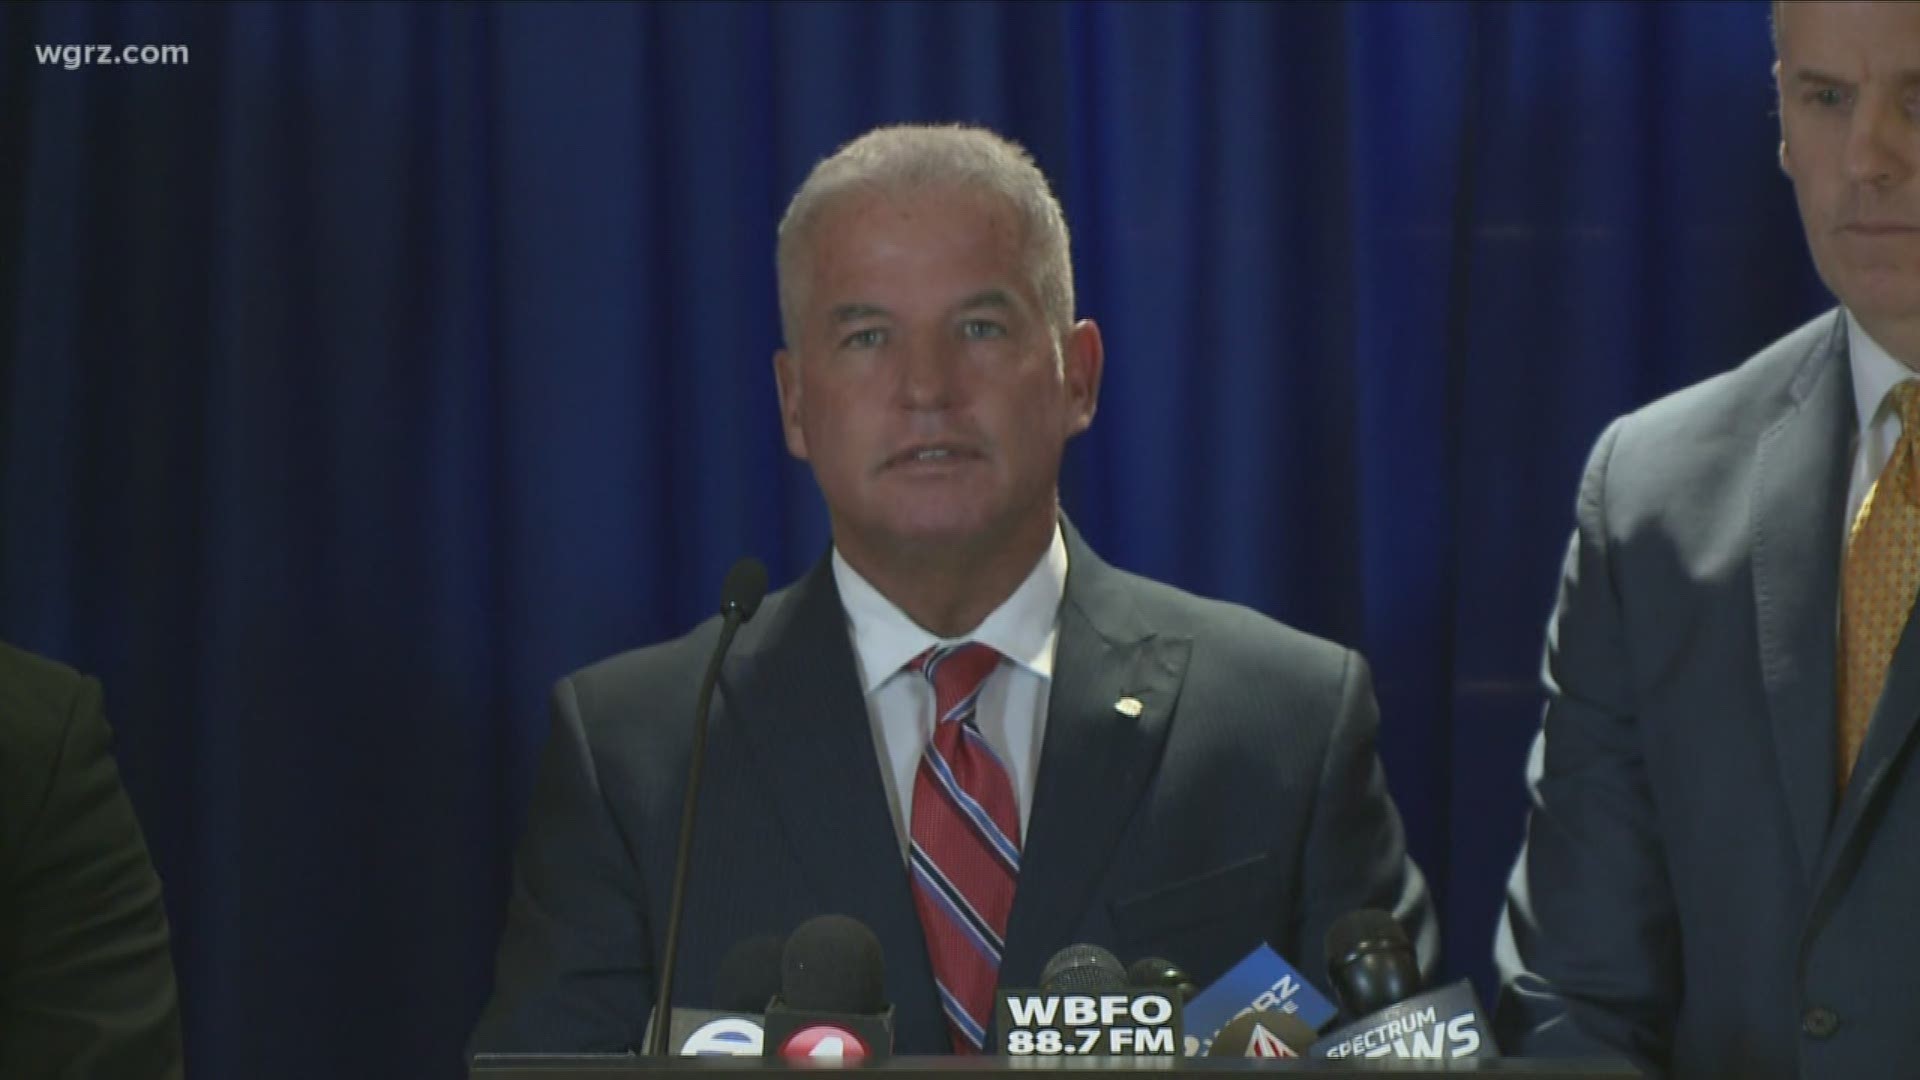 The U.S. Attorney's office held a news conference Tuesday afternoon to discuss the indictment involving public corruption.